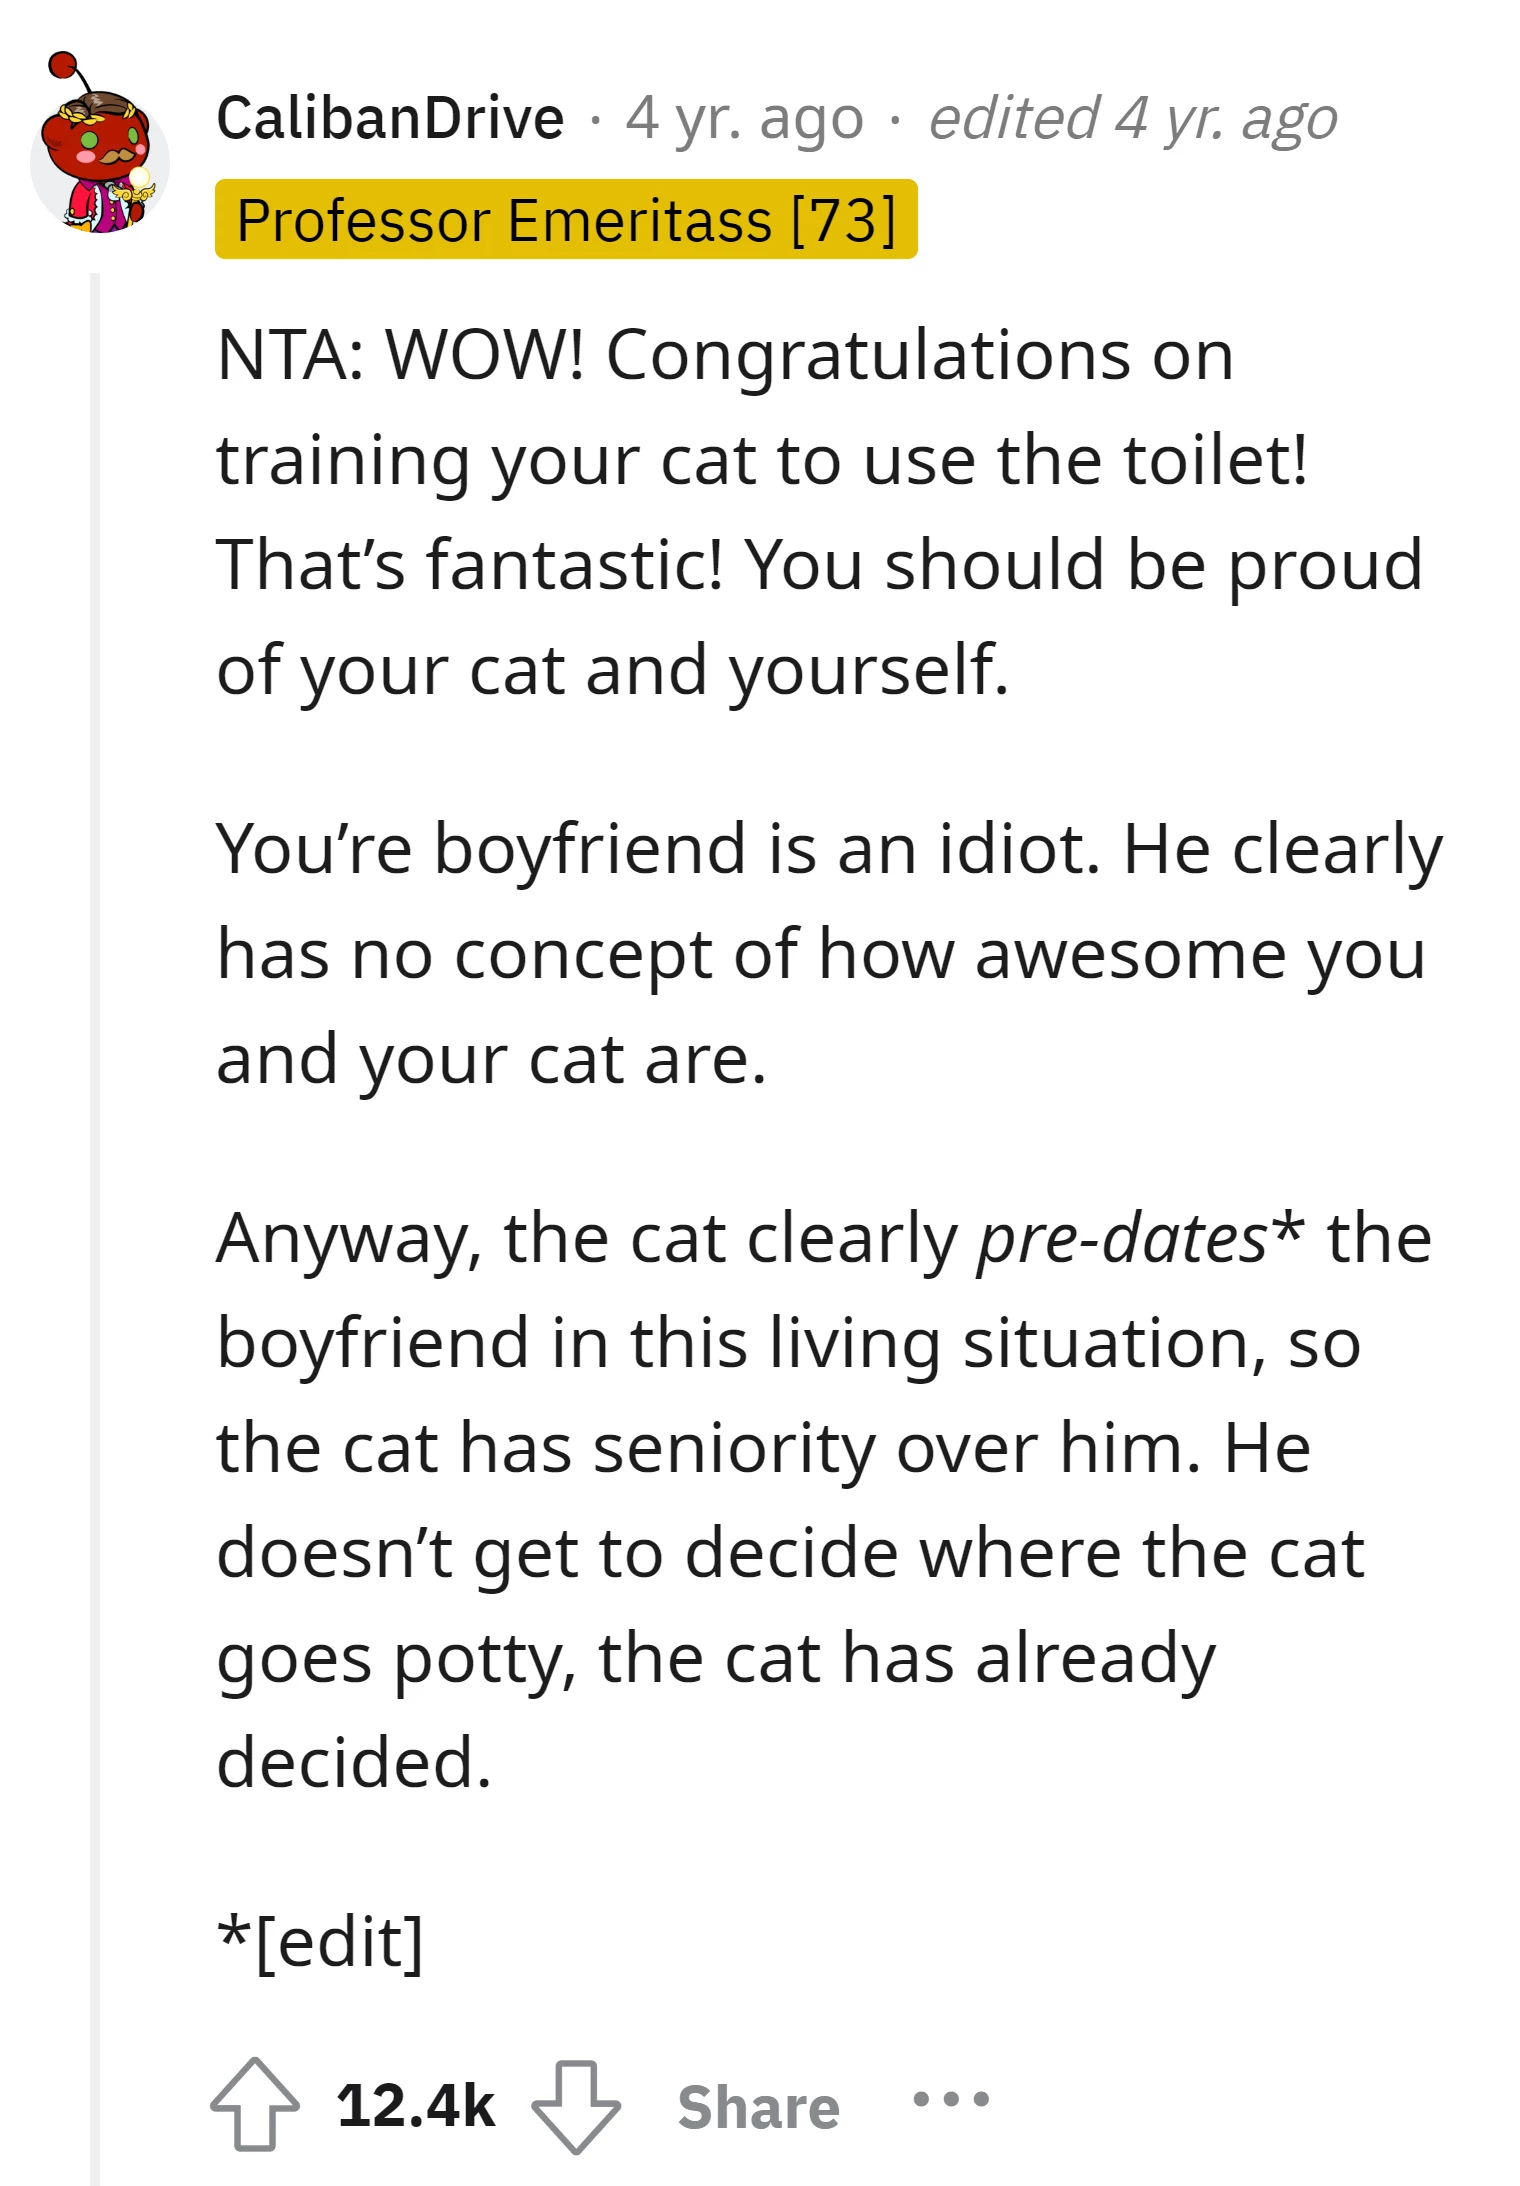 Commenter applauds the OP for successfully toilet-training her cat